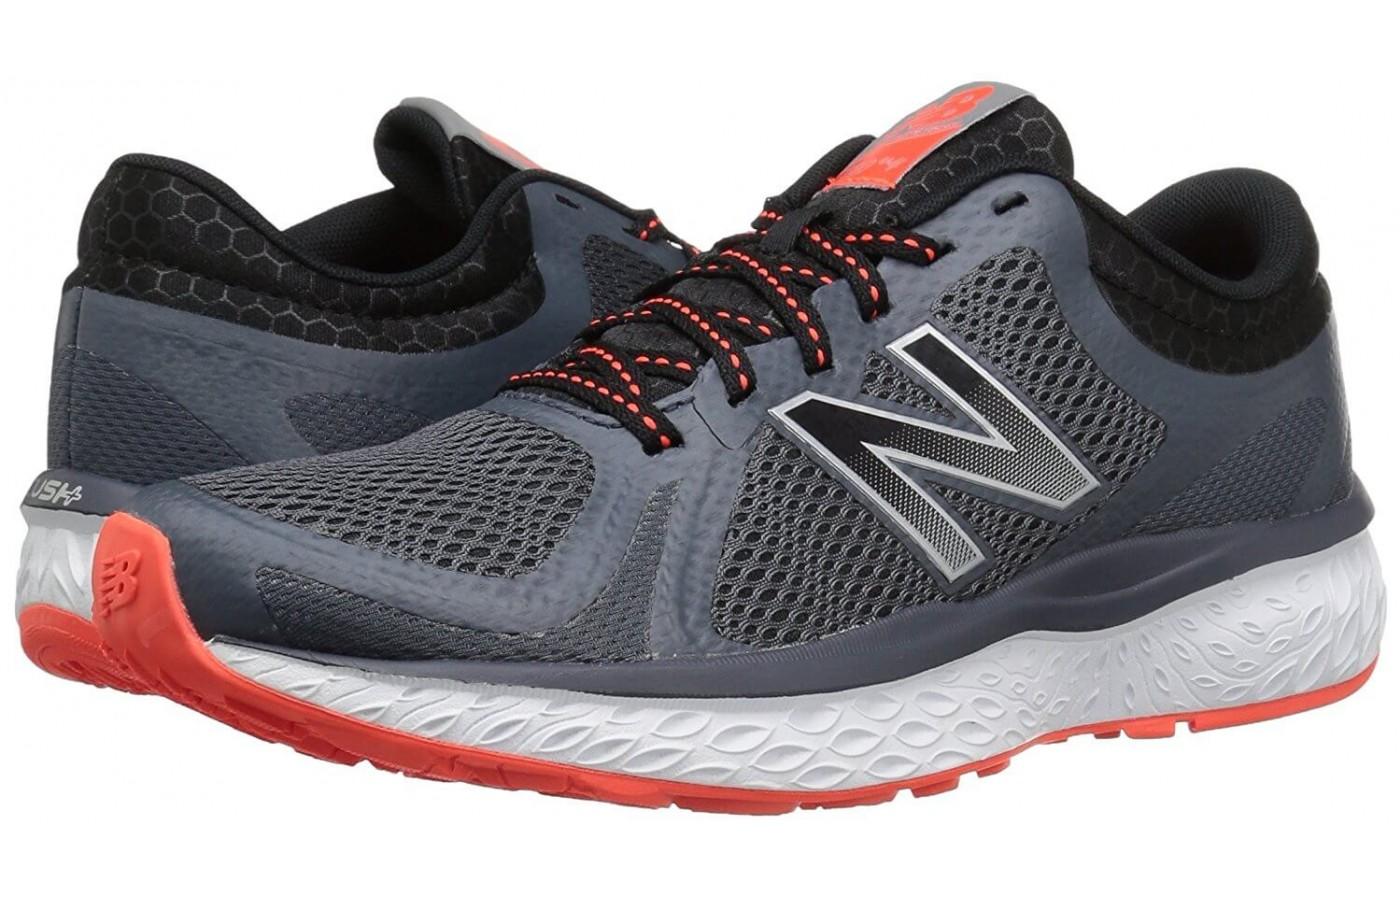 The New Balance 720 V4 is available in wide widths